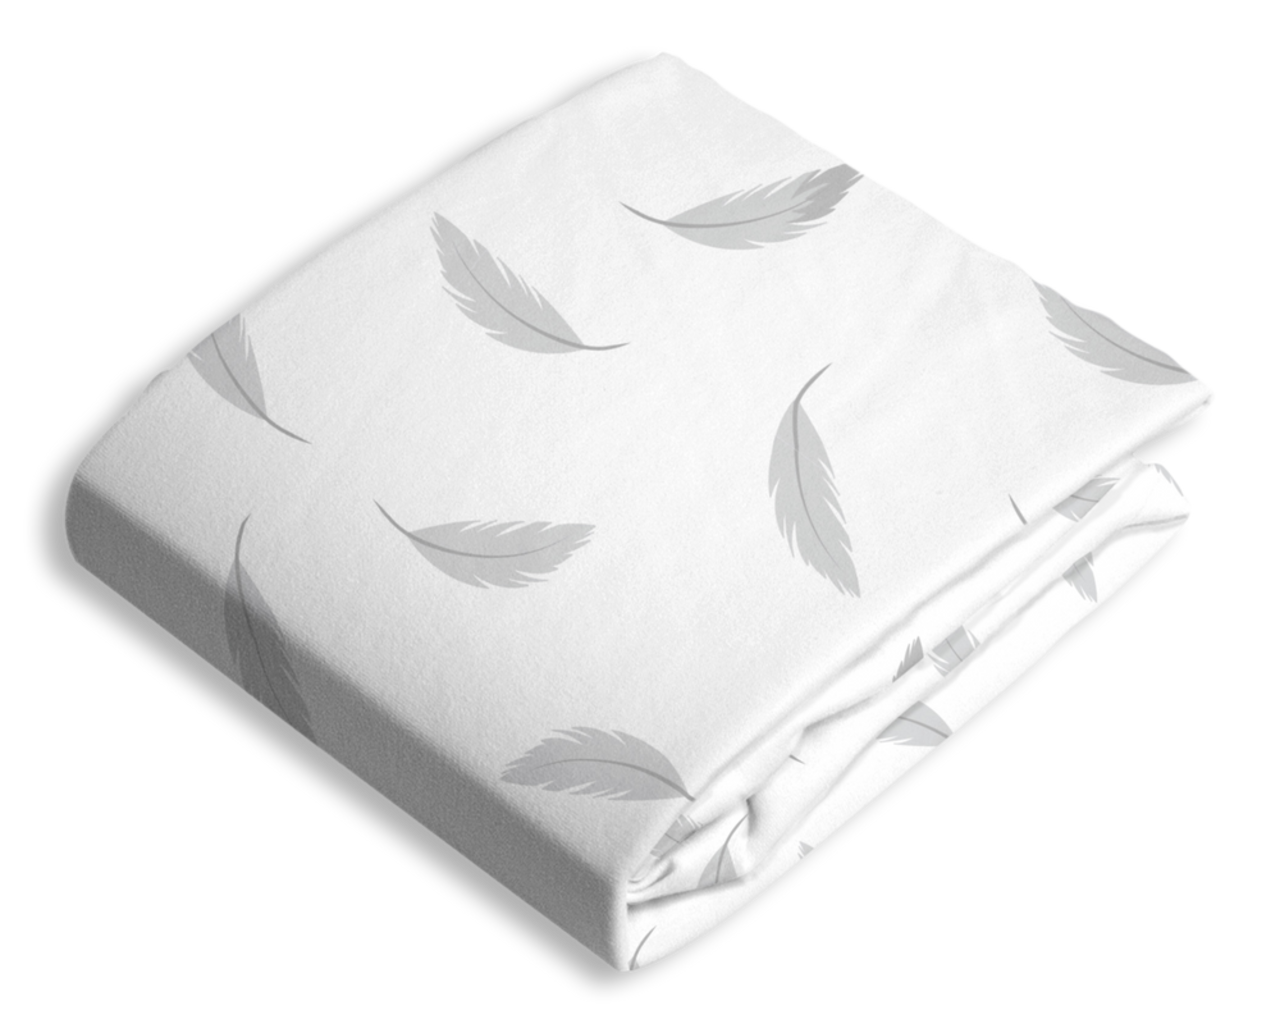 Kushies Changing Pad Cover for 1 pad, 100% breathable cotton